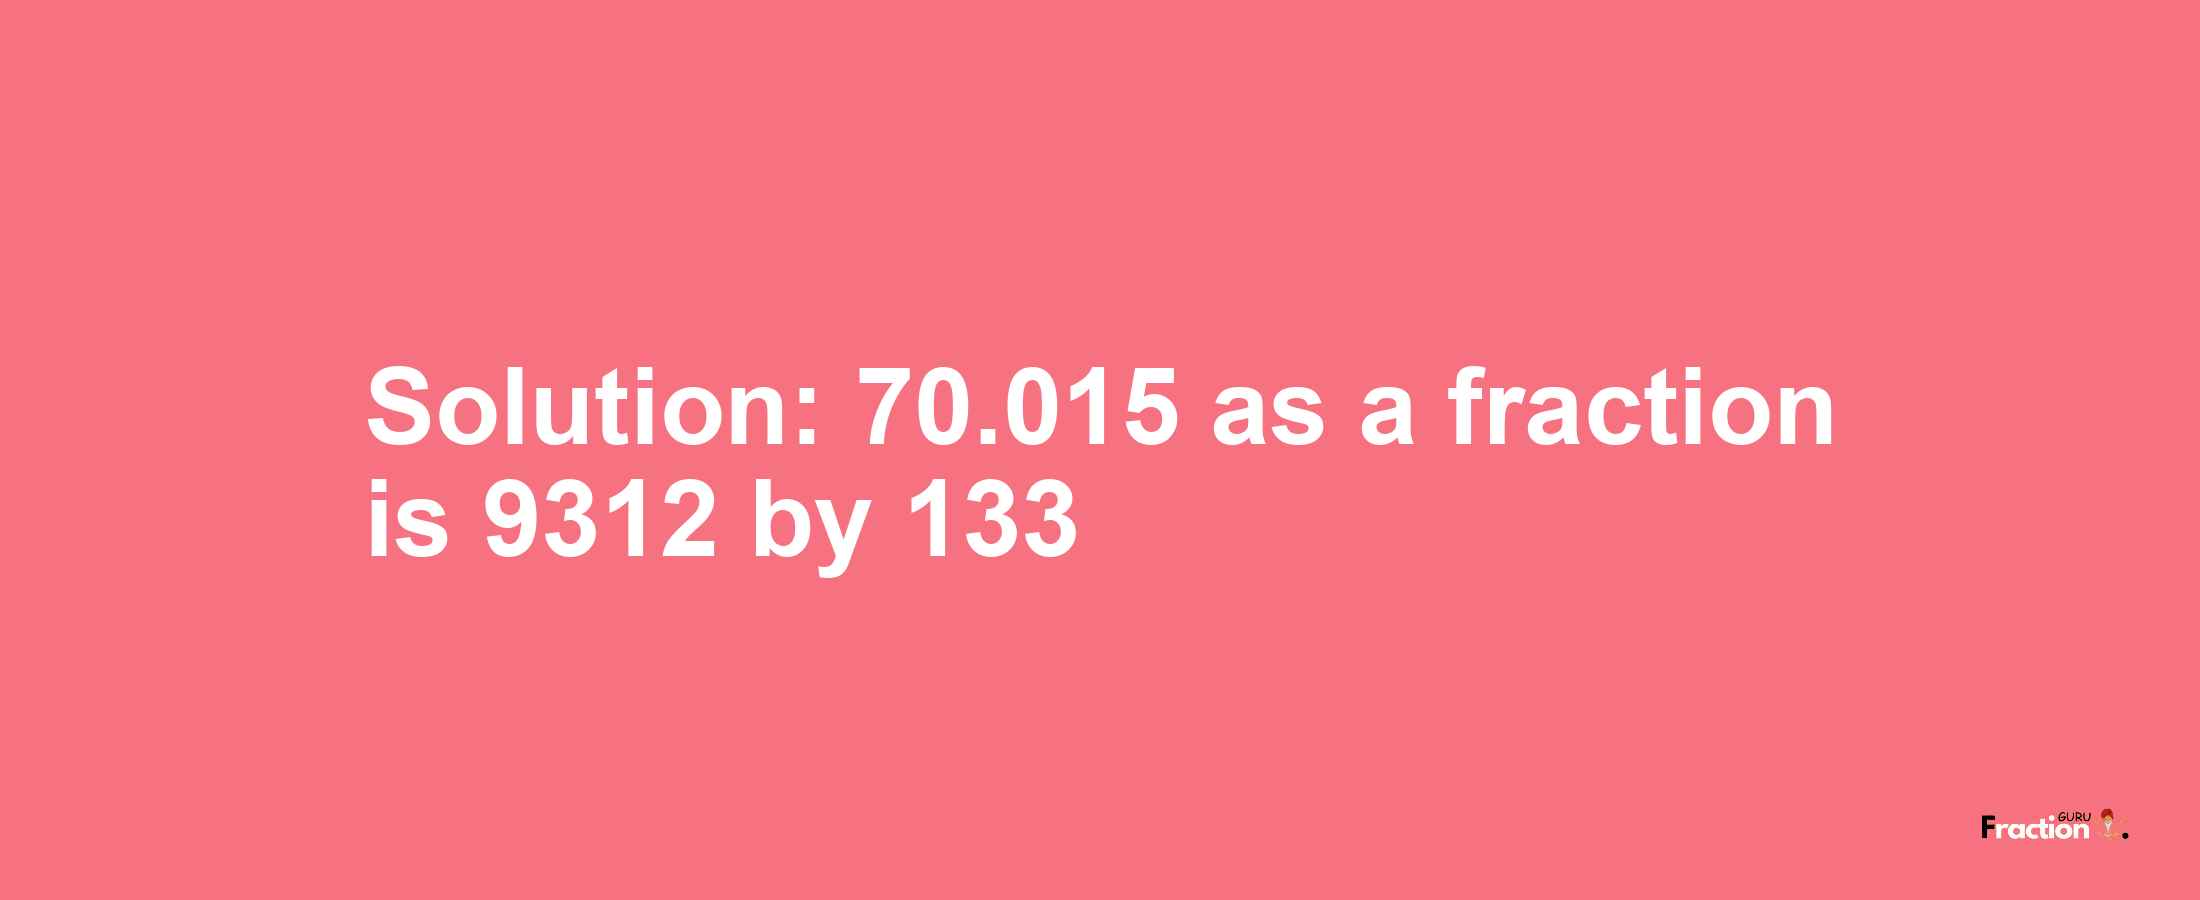 Solution:70.015 as a fraction is 9312/133